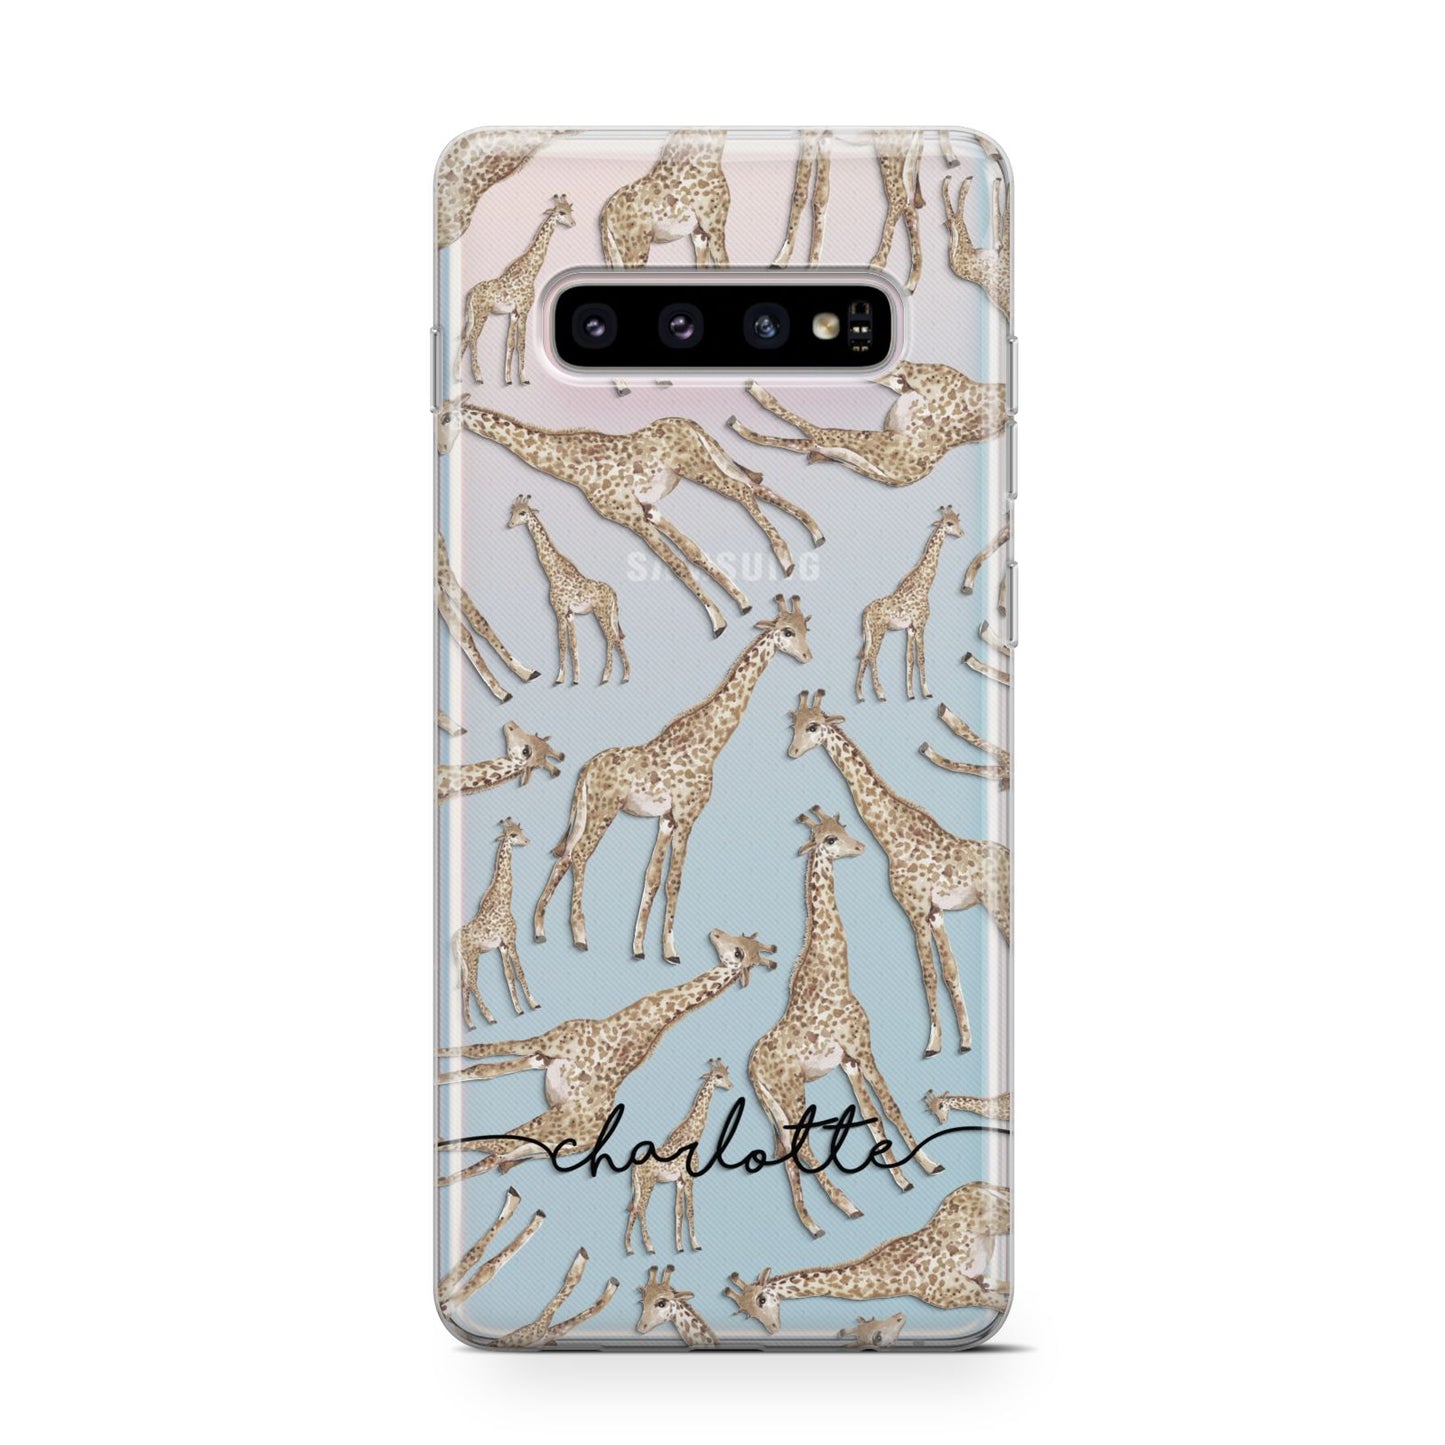 Personalised Giraffes with Name Samsung Galaxy S10 Case